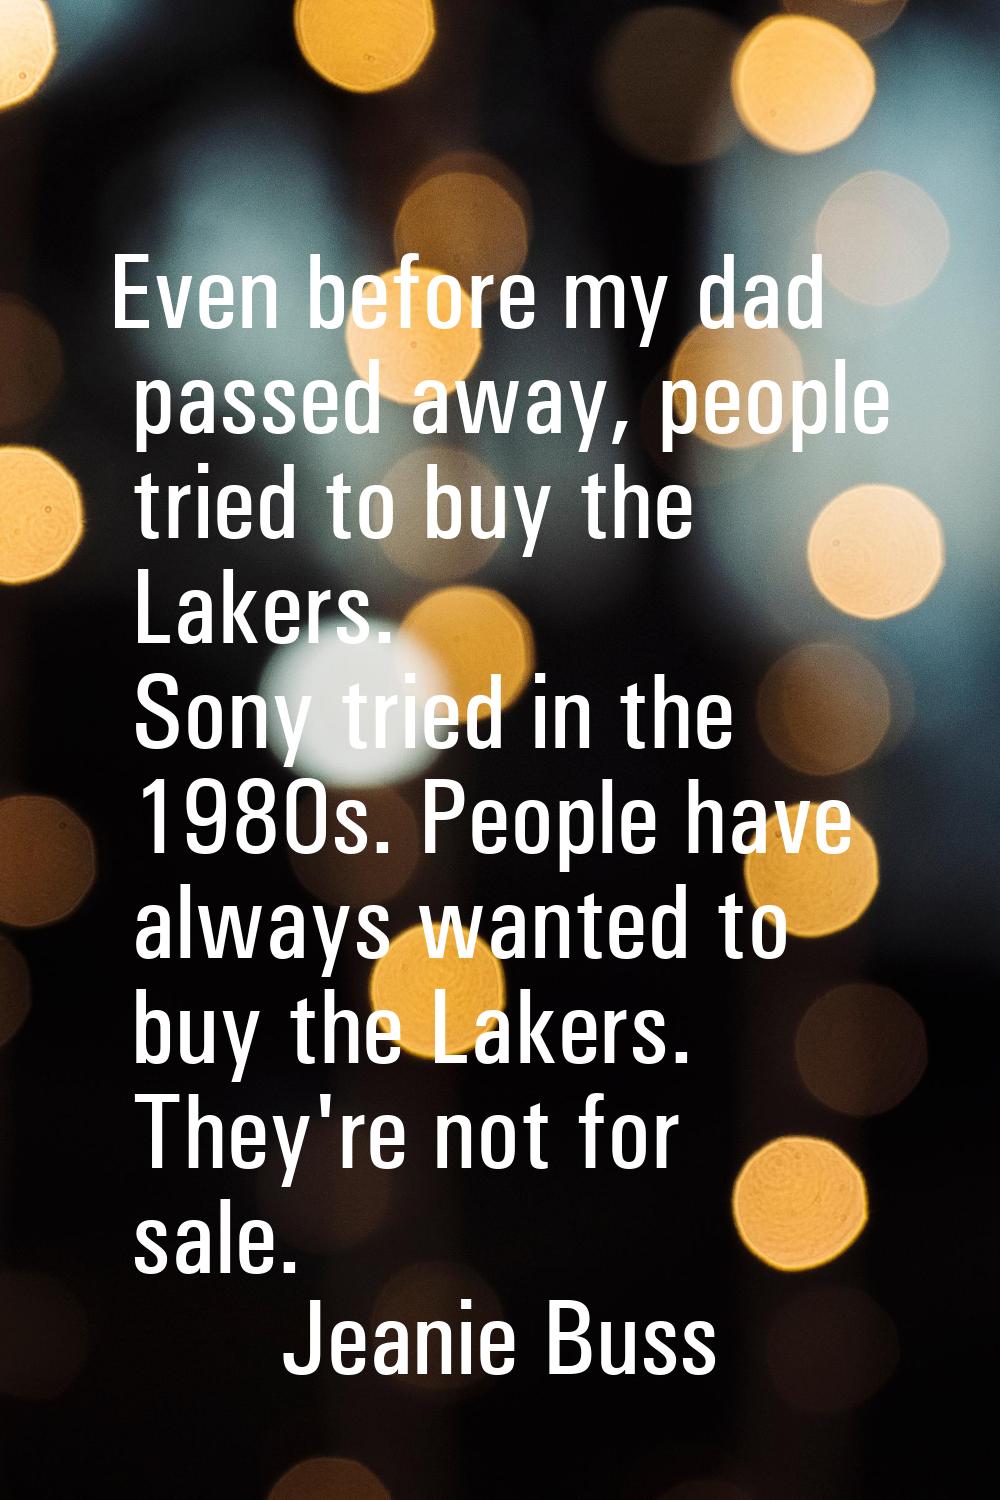 Even before my dad passed away, people tried to buy the Lakers. Sony tried in the 1980s. People hav